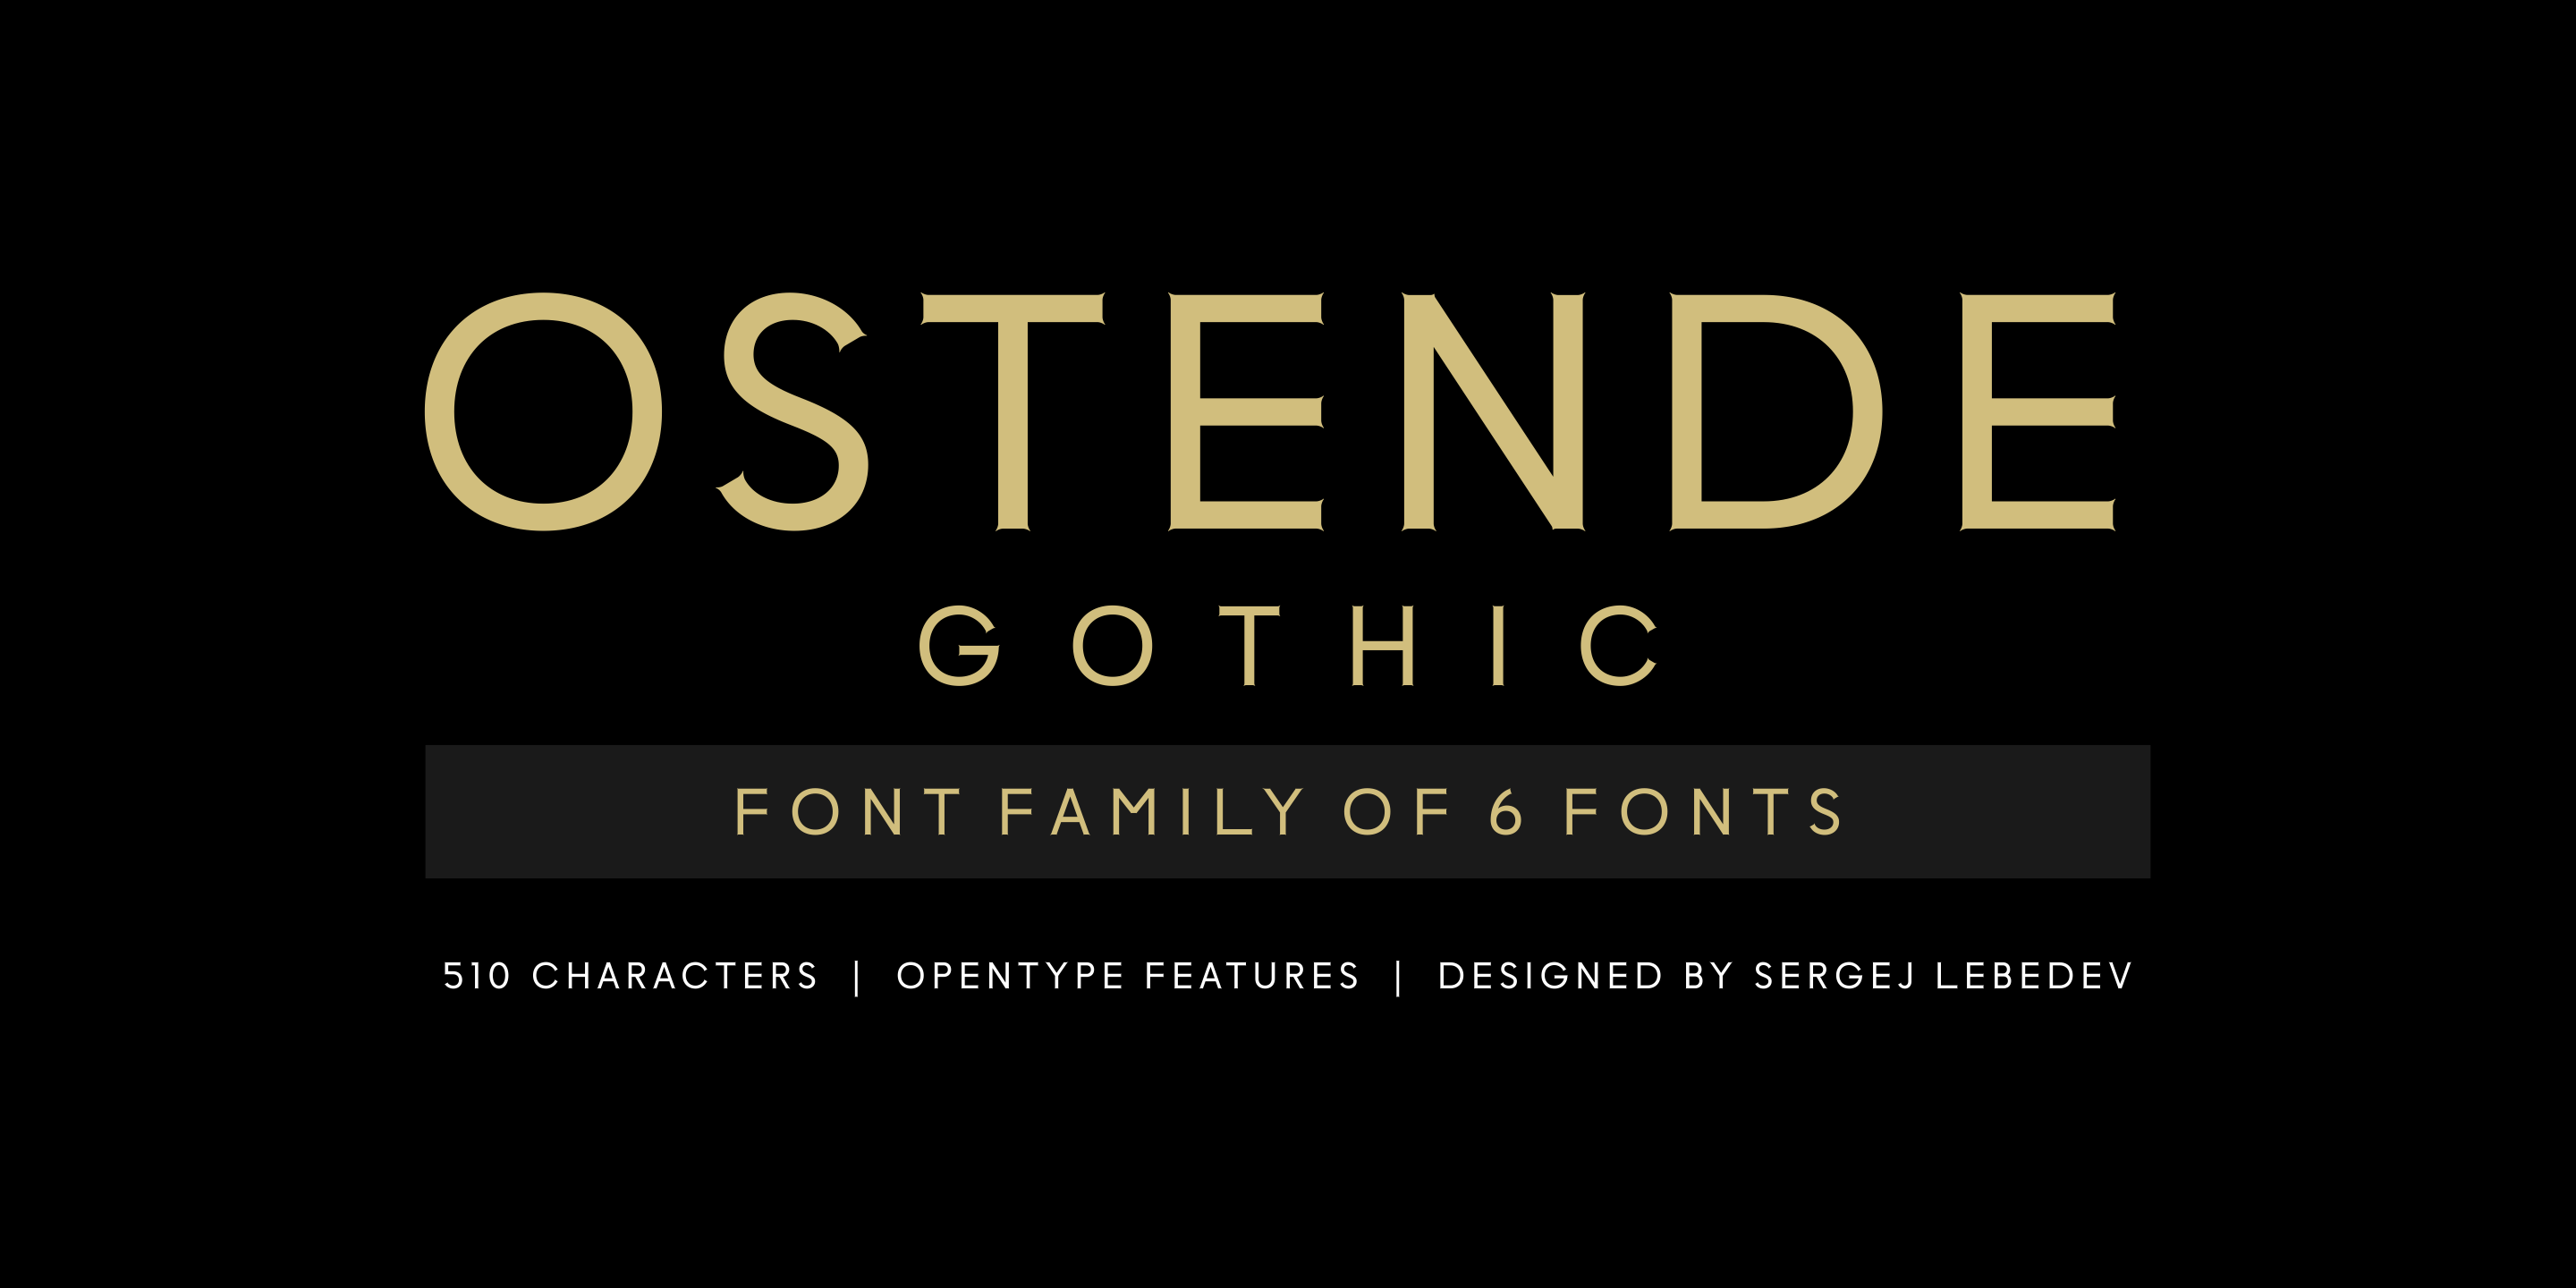 The font family "Ostende Gothic" is a modern, constructed typeface that is particularly well suited for printed materials, graphic design, communication design and product design. The fonts are equipped with small, discreet serifs, have an exclusive design style and many OpenType features.